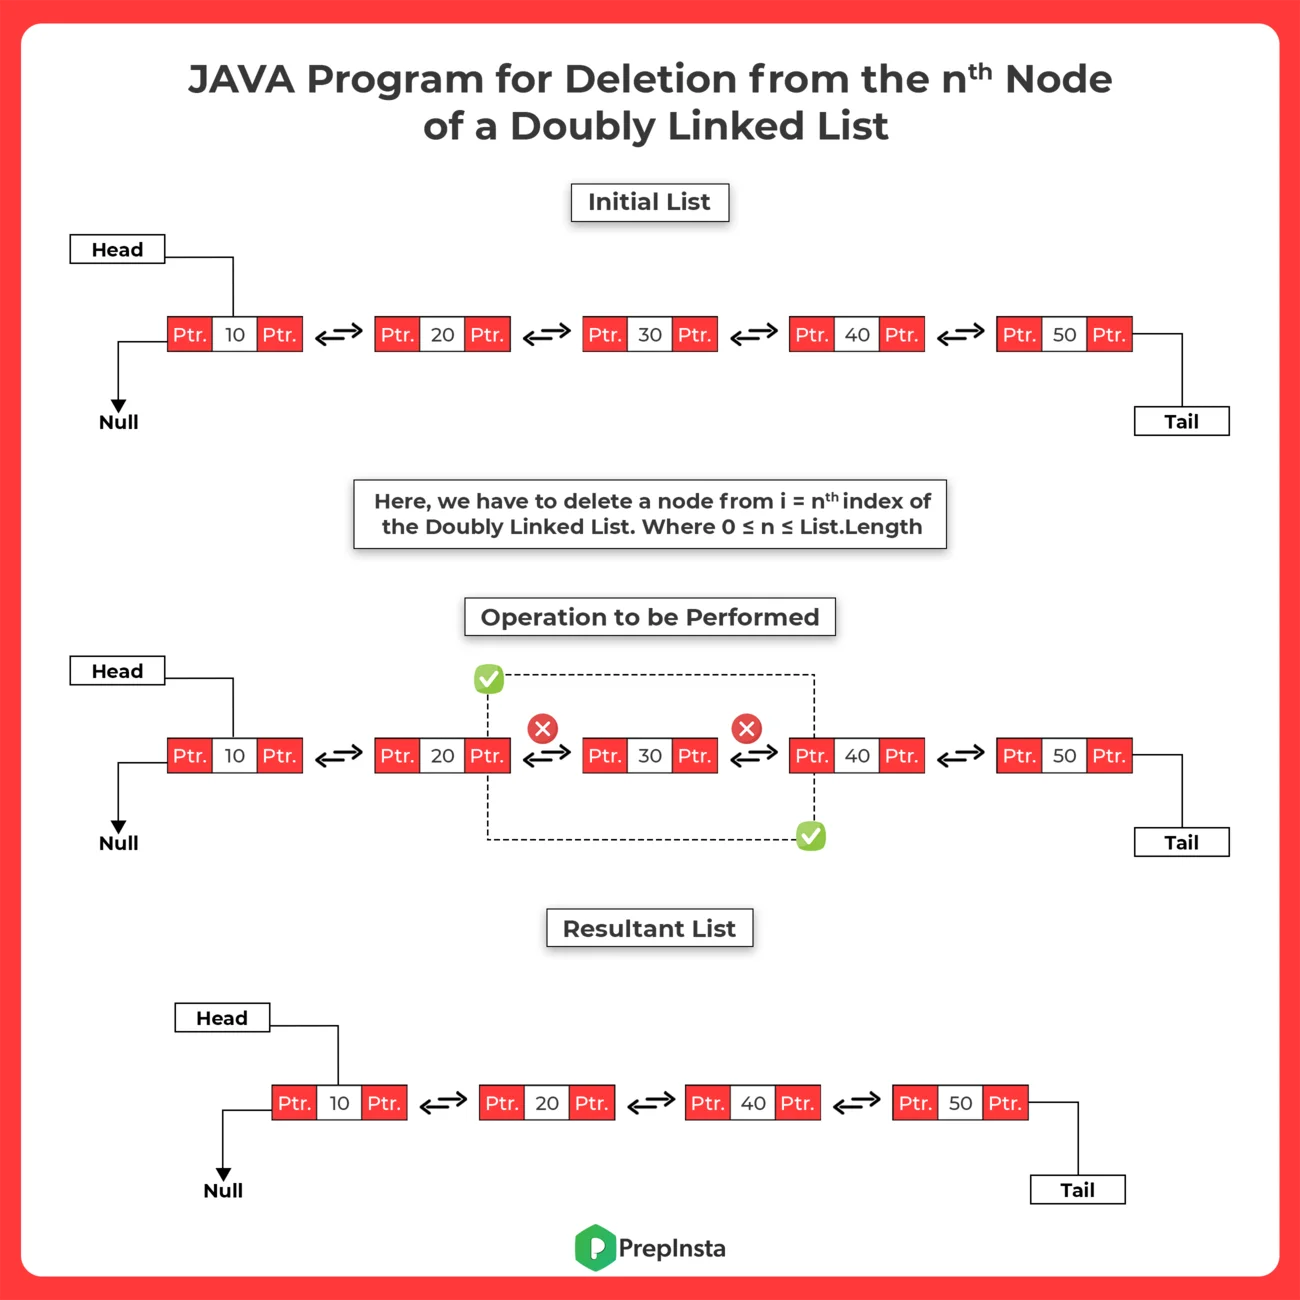 JAVA Program for Deletion from the nth node in a Doubly Linked List